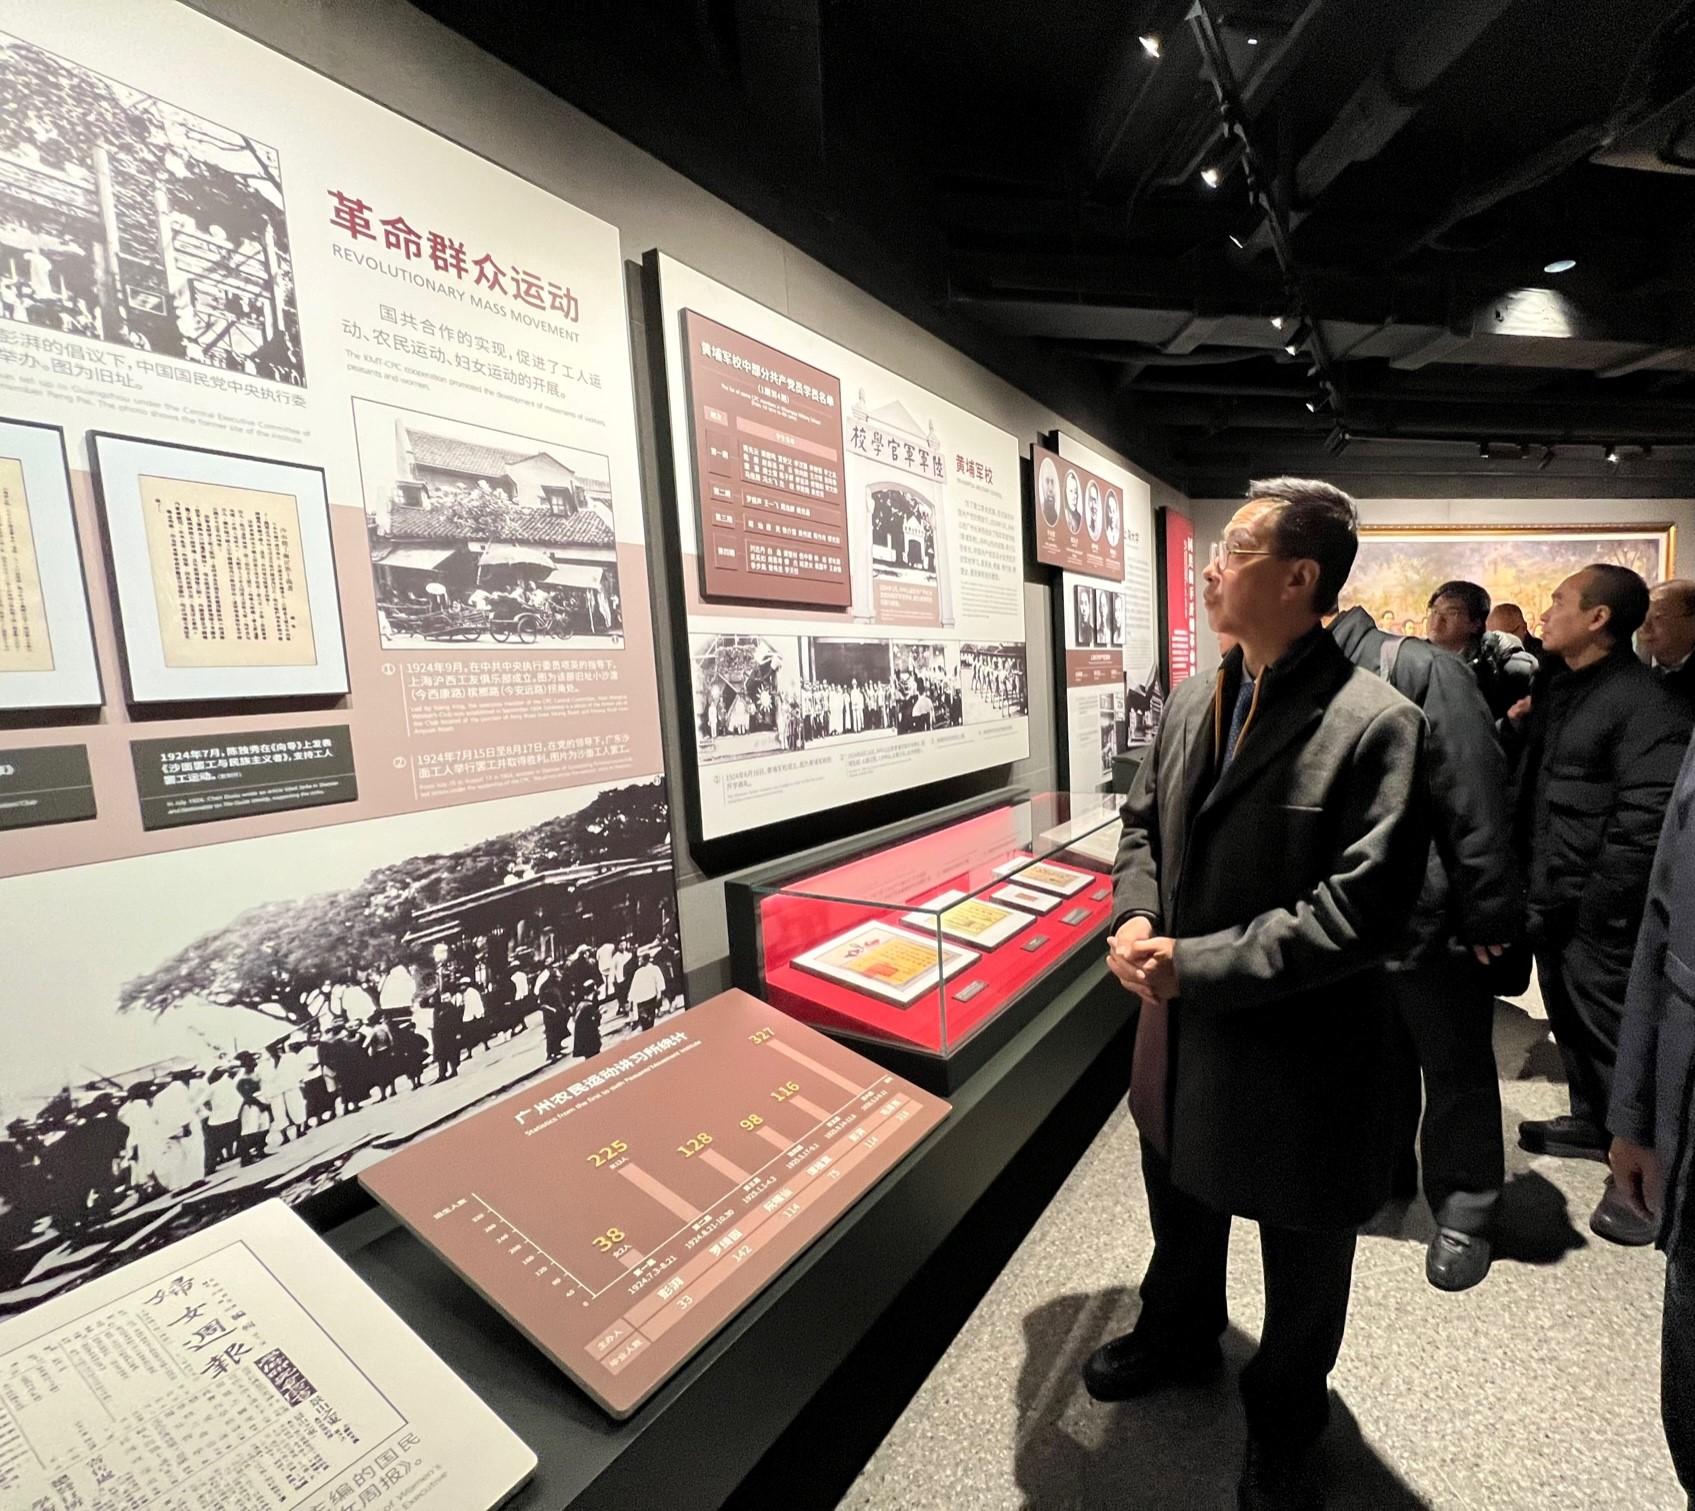 The Secretary for Culture, Sports and Tourism, Mr Kevin Yeung, visits the Memorial Site of the 4th National Congress of the Communist Party of China in Shanghai today (January 8) to learn more about the curation of different exhibitions, which will be beneficial to the preparatory work of formulating a museum in Hong Kong to showcase the development and achievements of the country.